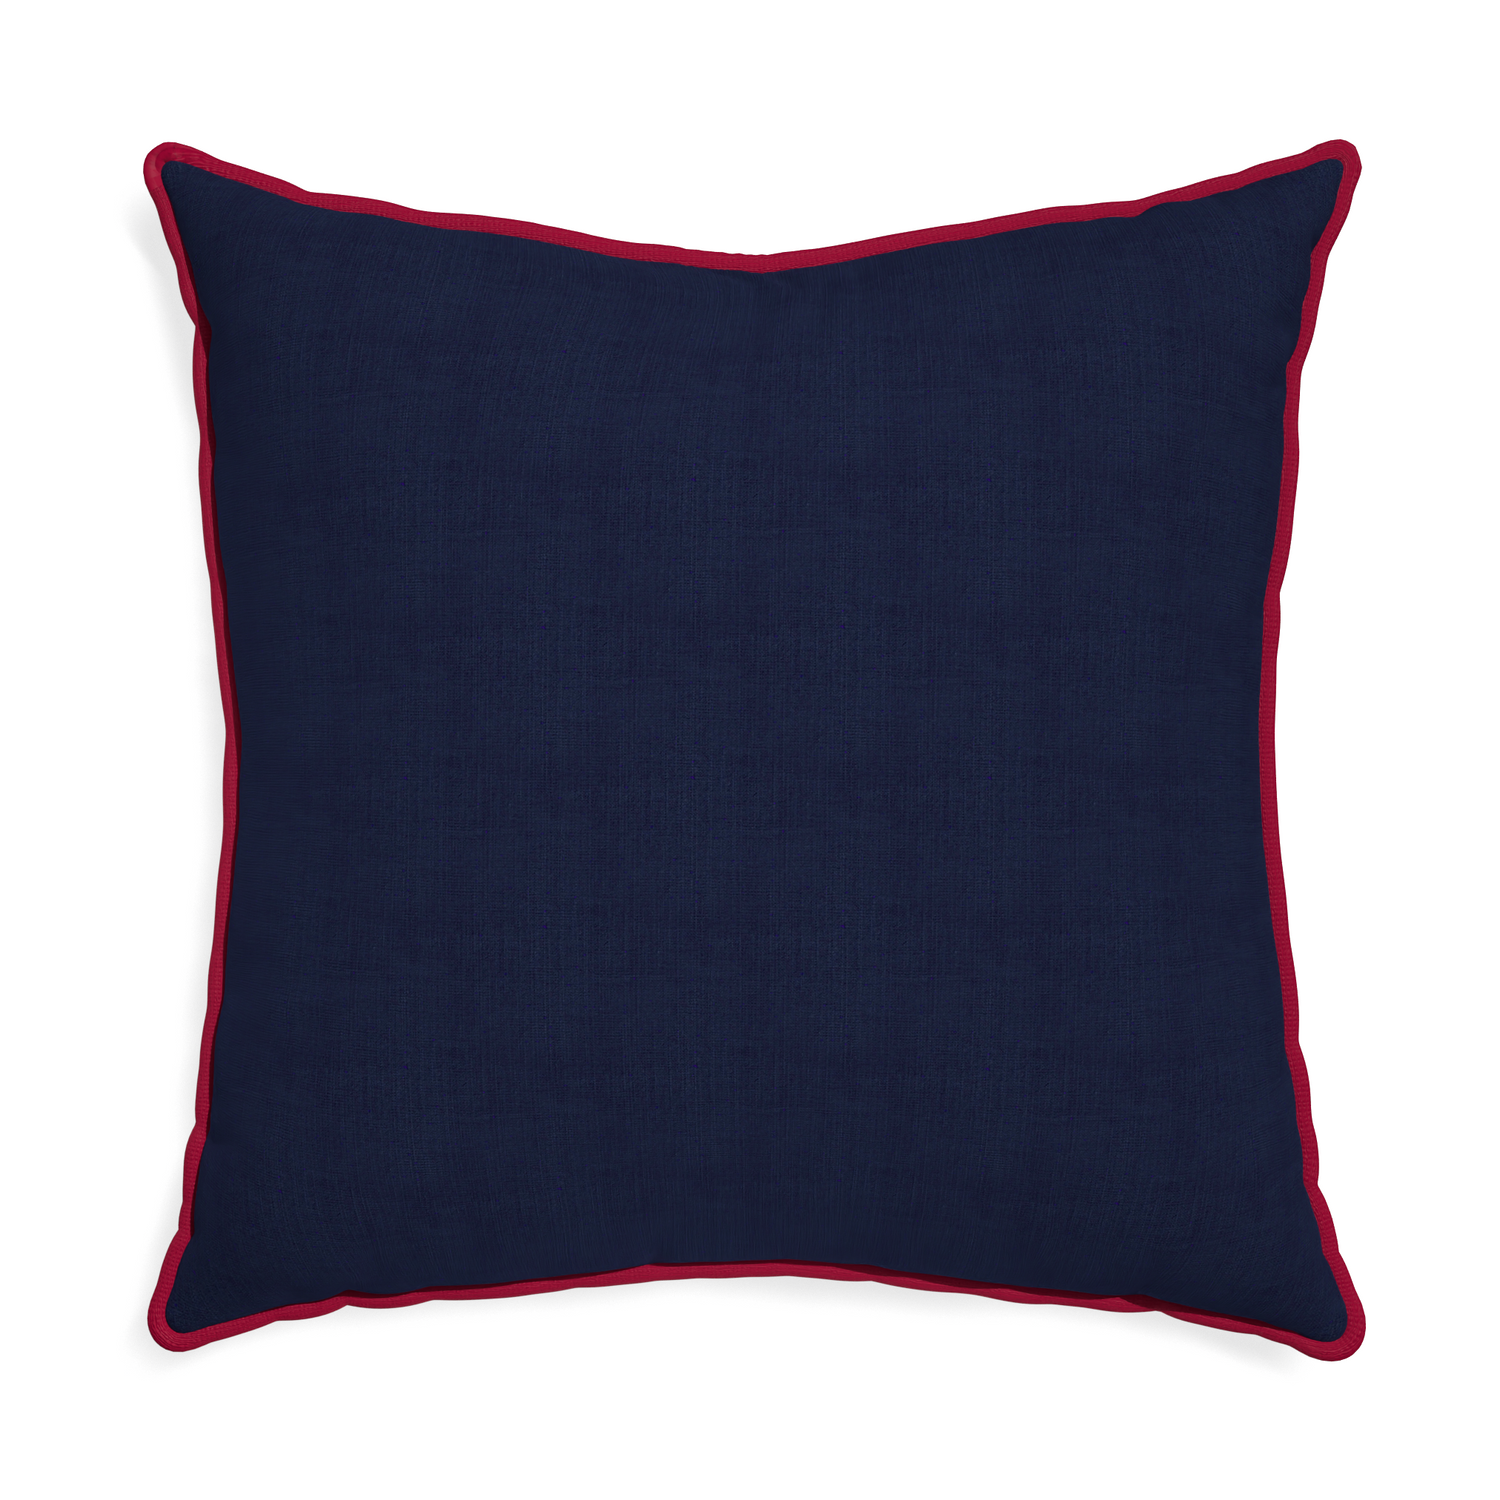 Euro-sham midnight custom pillow with raspberry piping on white background